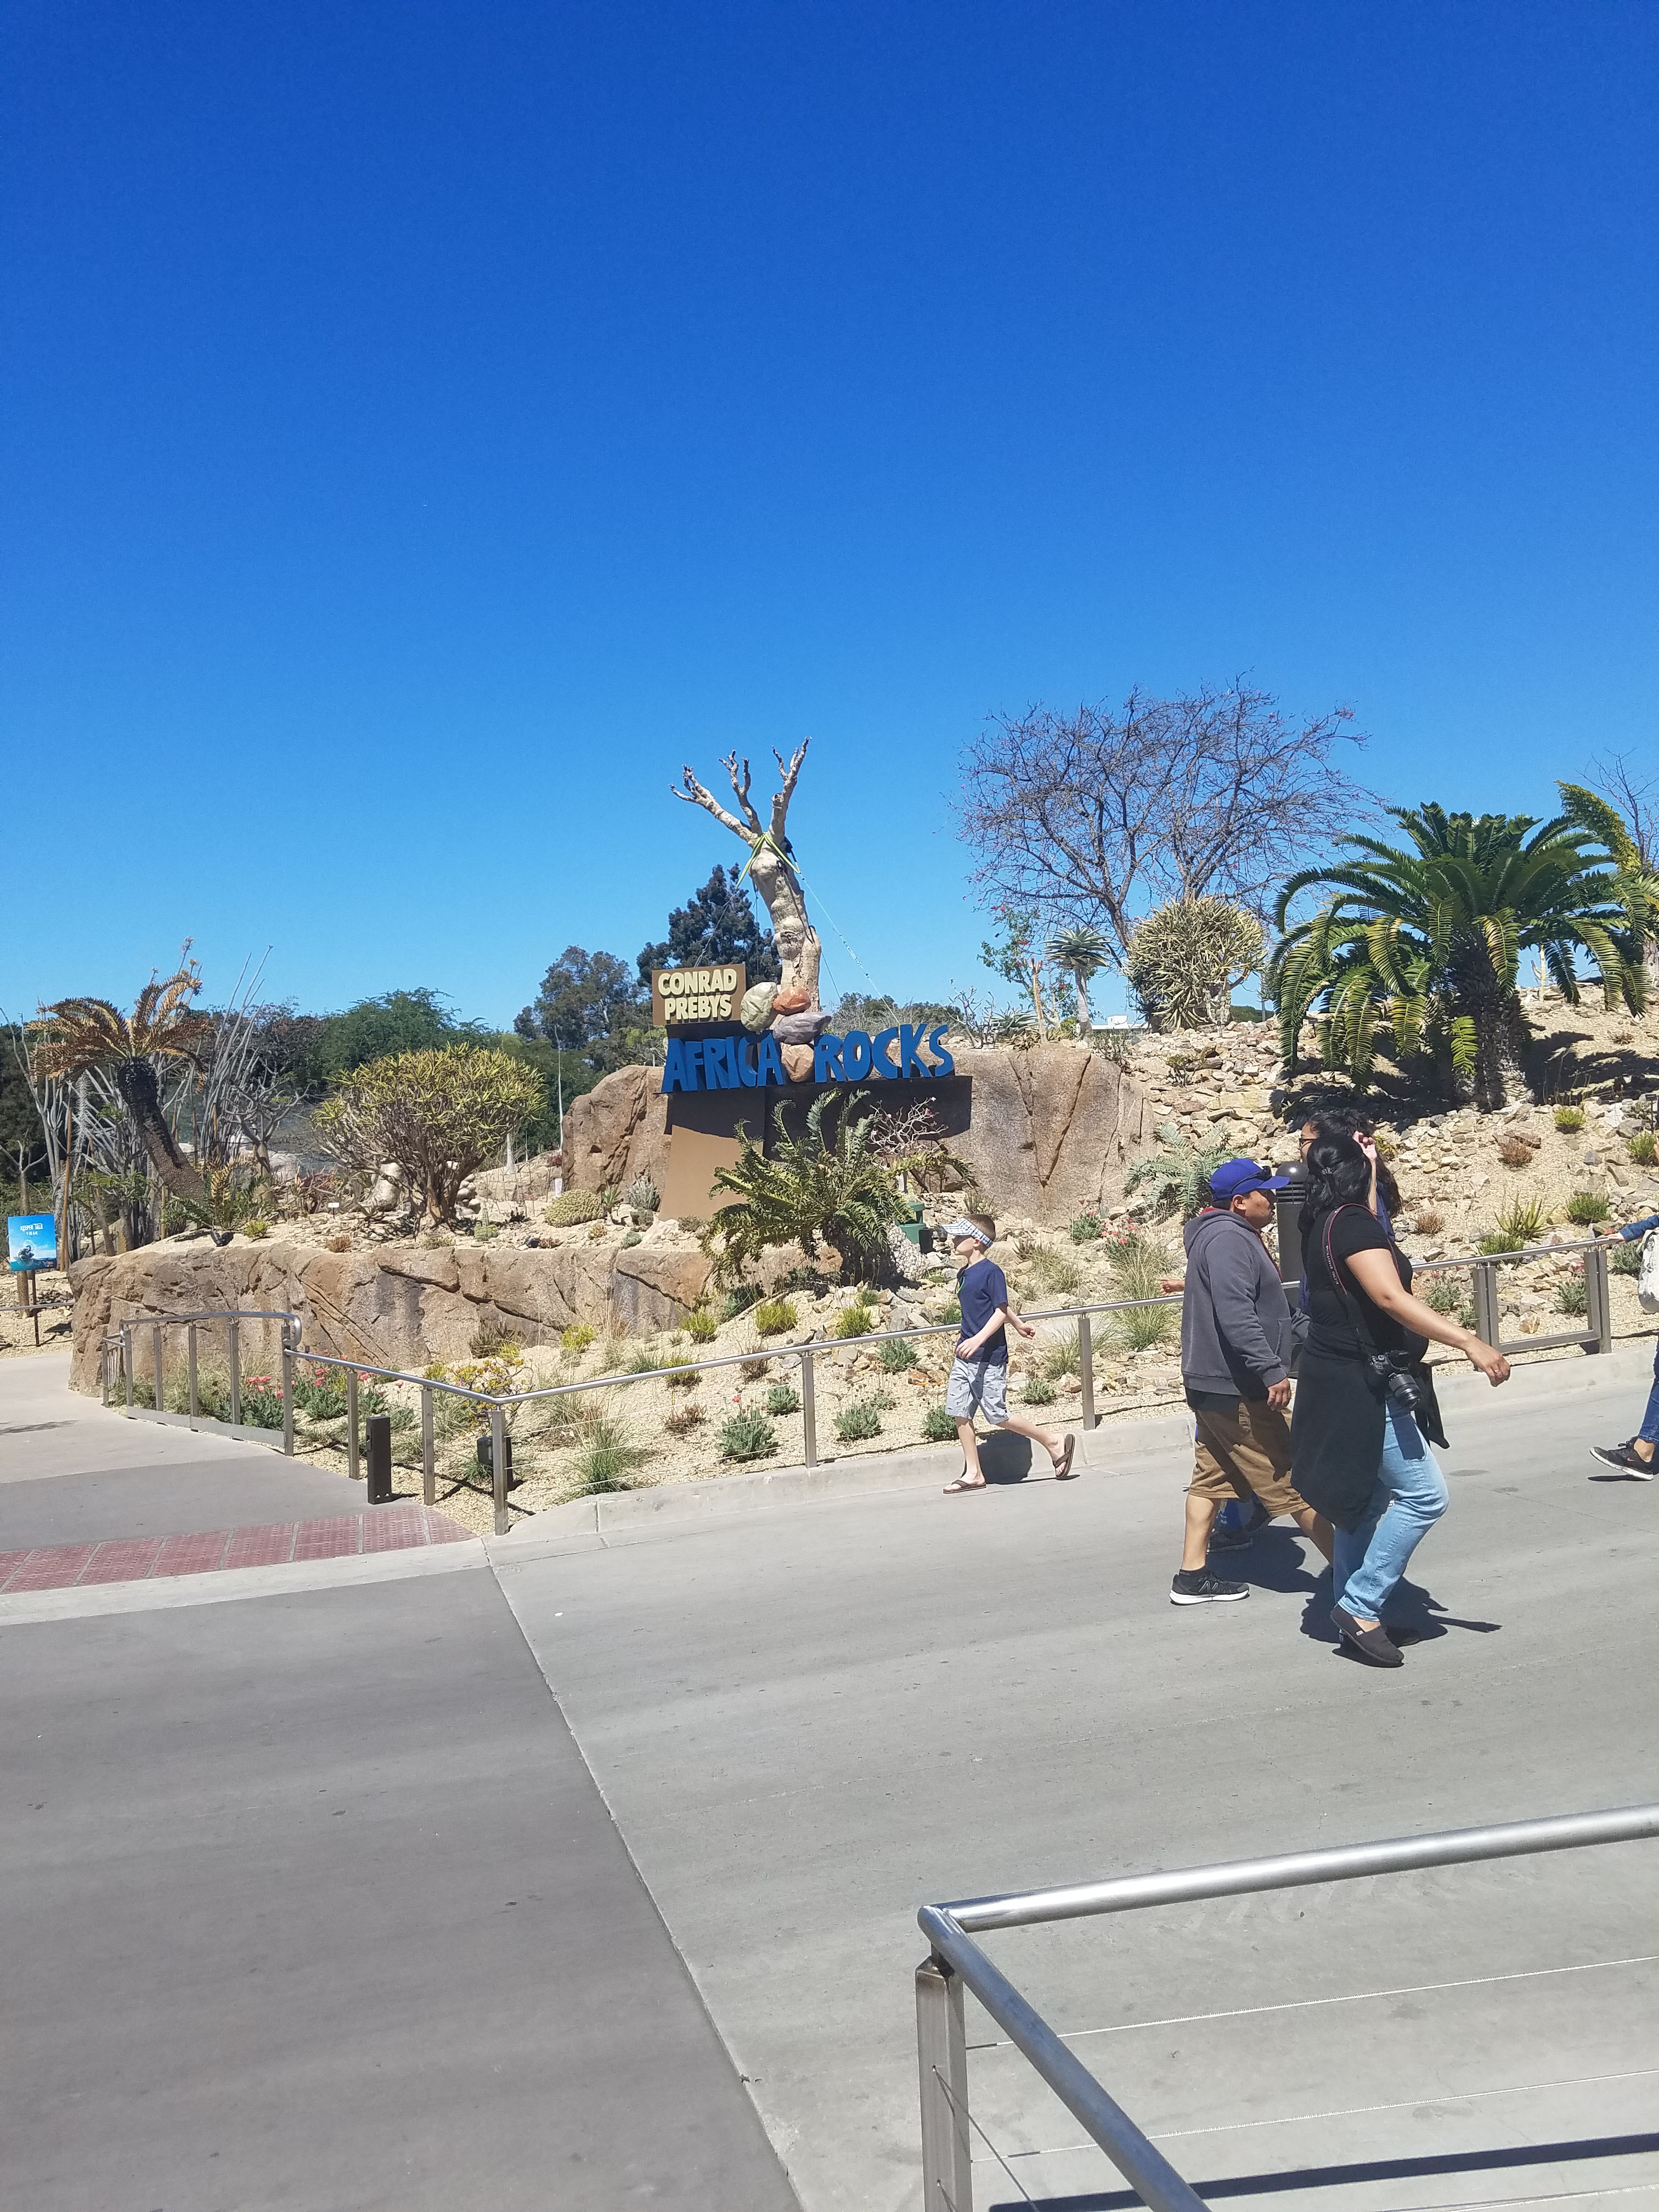 Africa Rocks at the San Diego Zoo